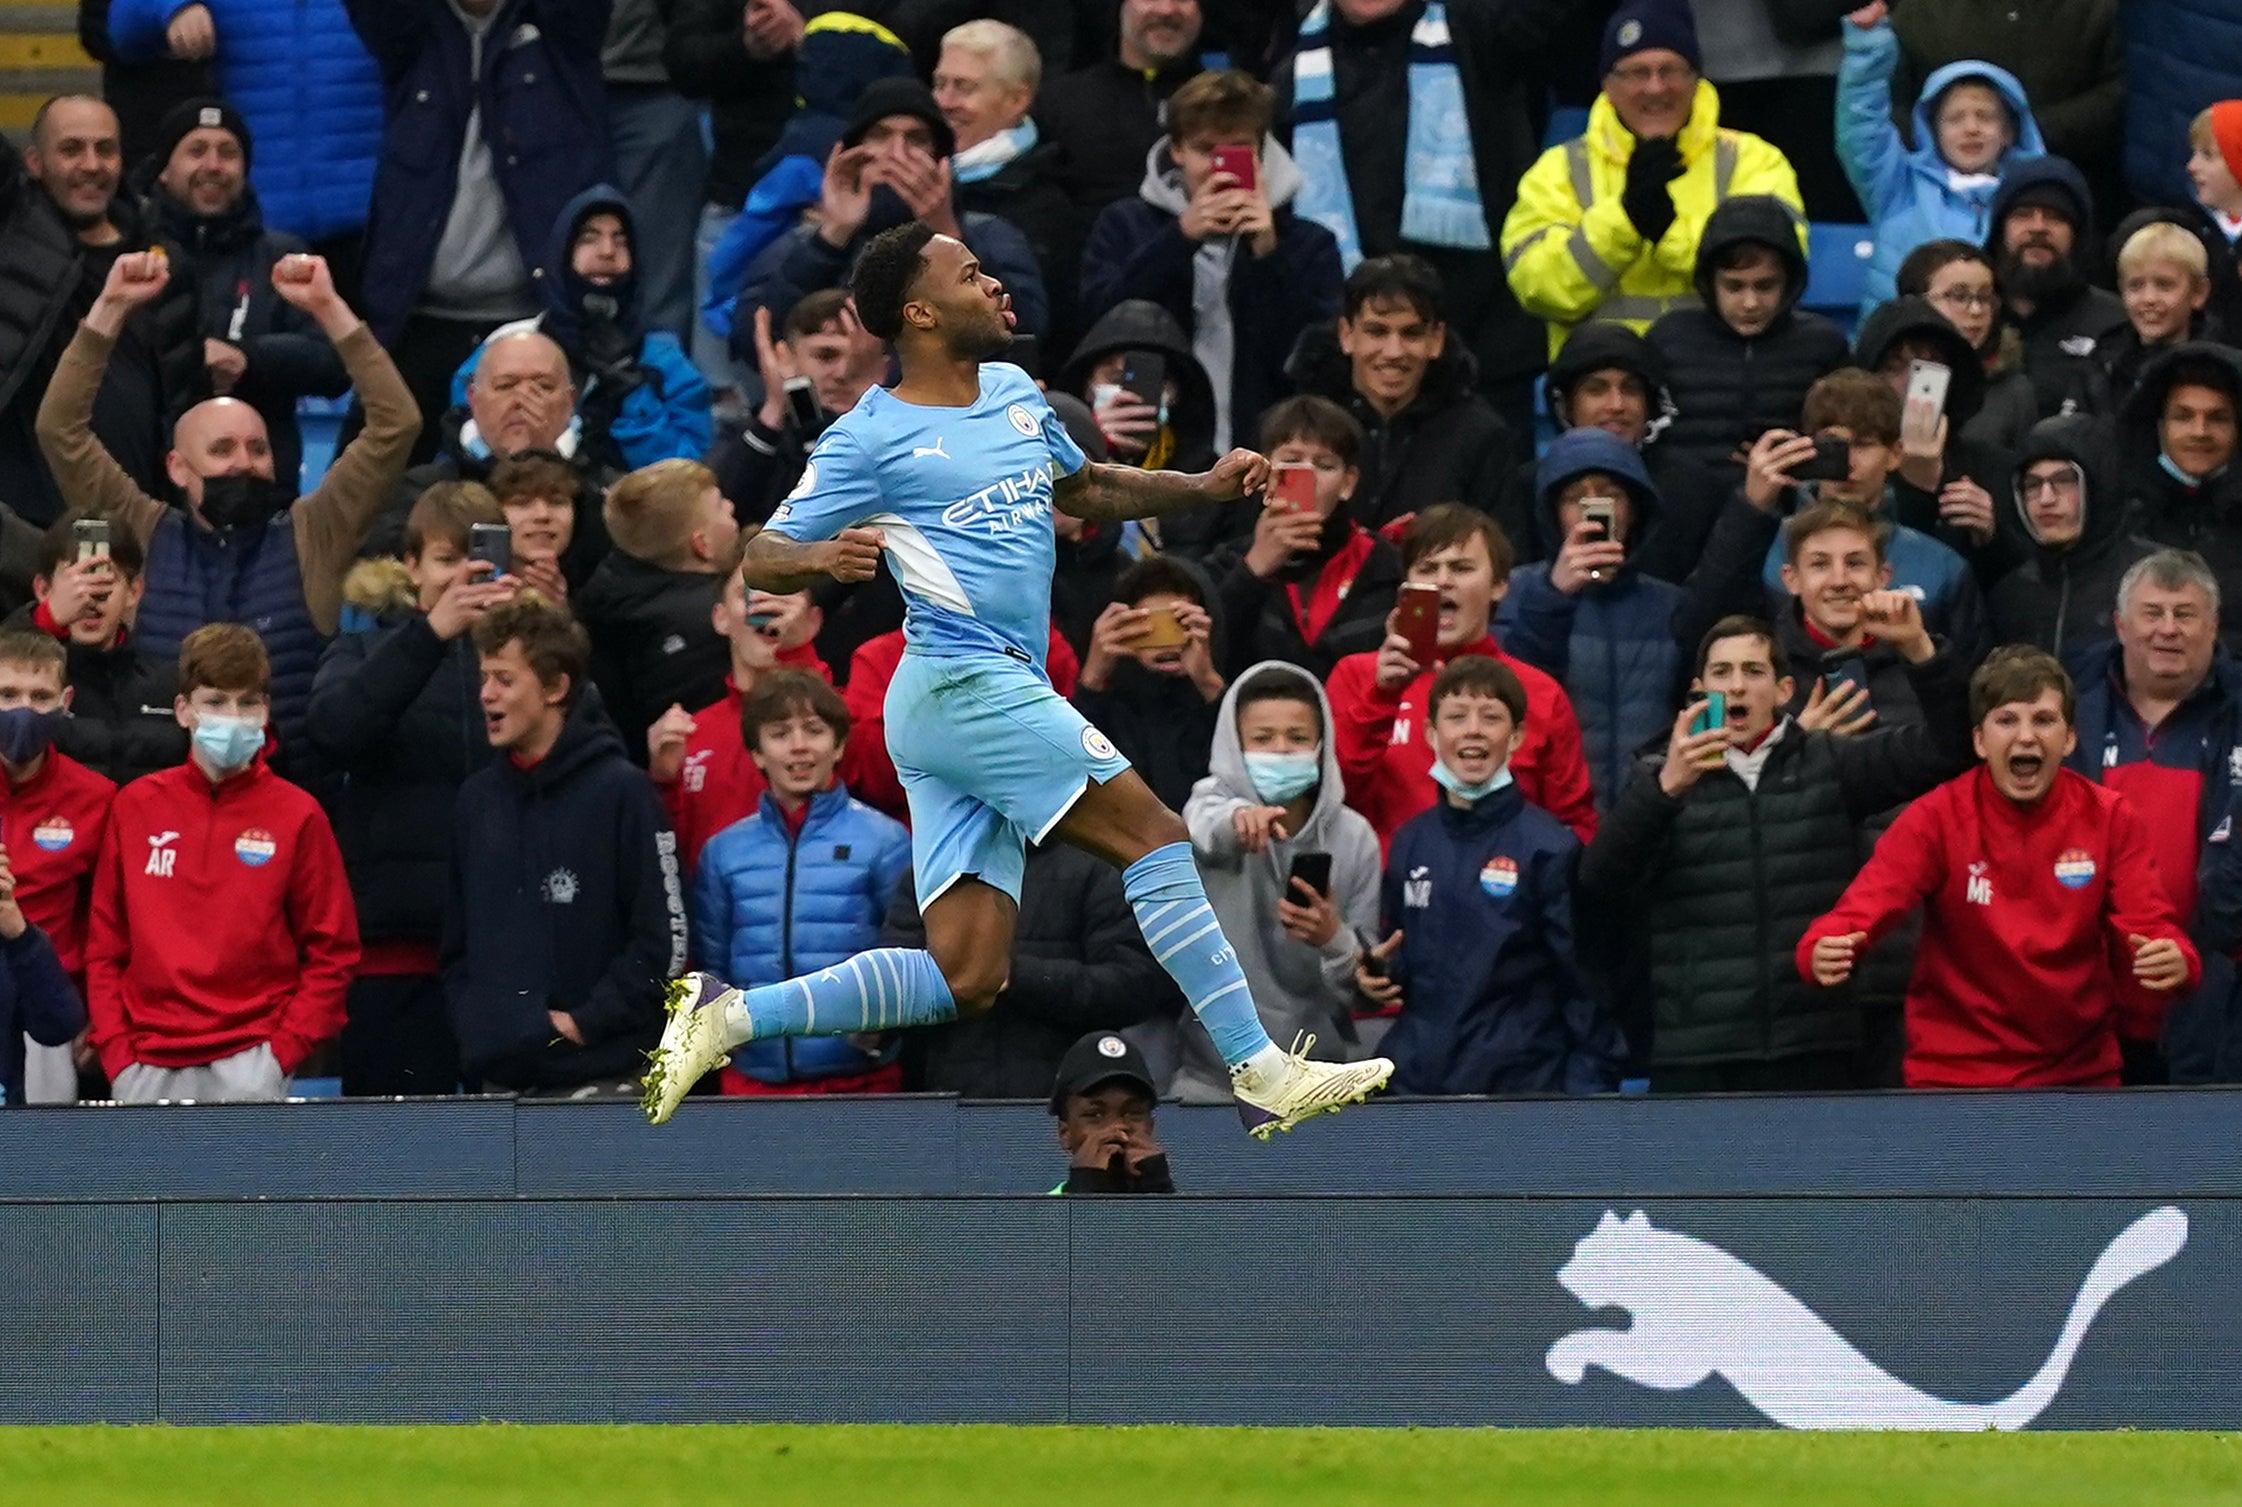 Manchester City’s Raheem Sterling celebrates scoring what was his 100th Premier League goal against Wolves last week (Martin Rickett/PA)